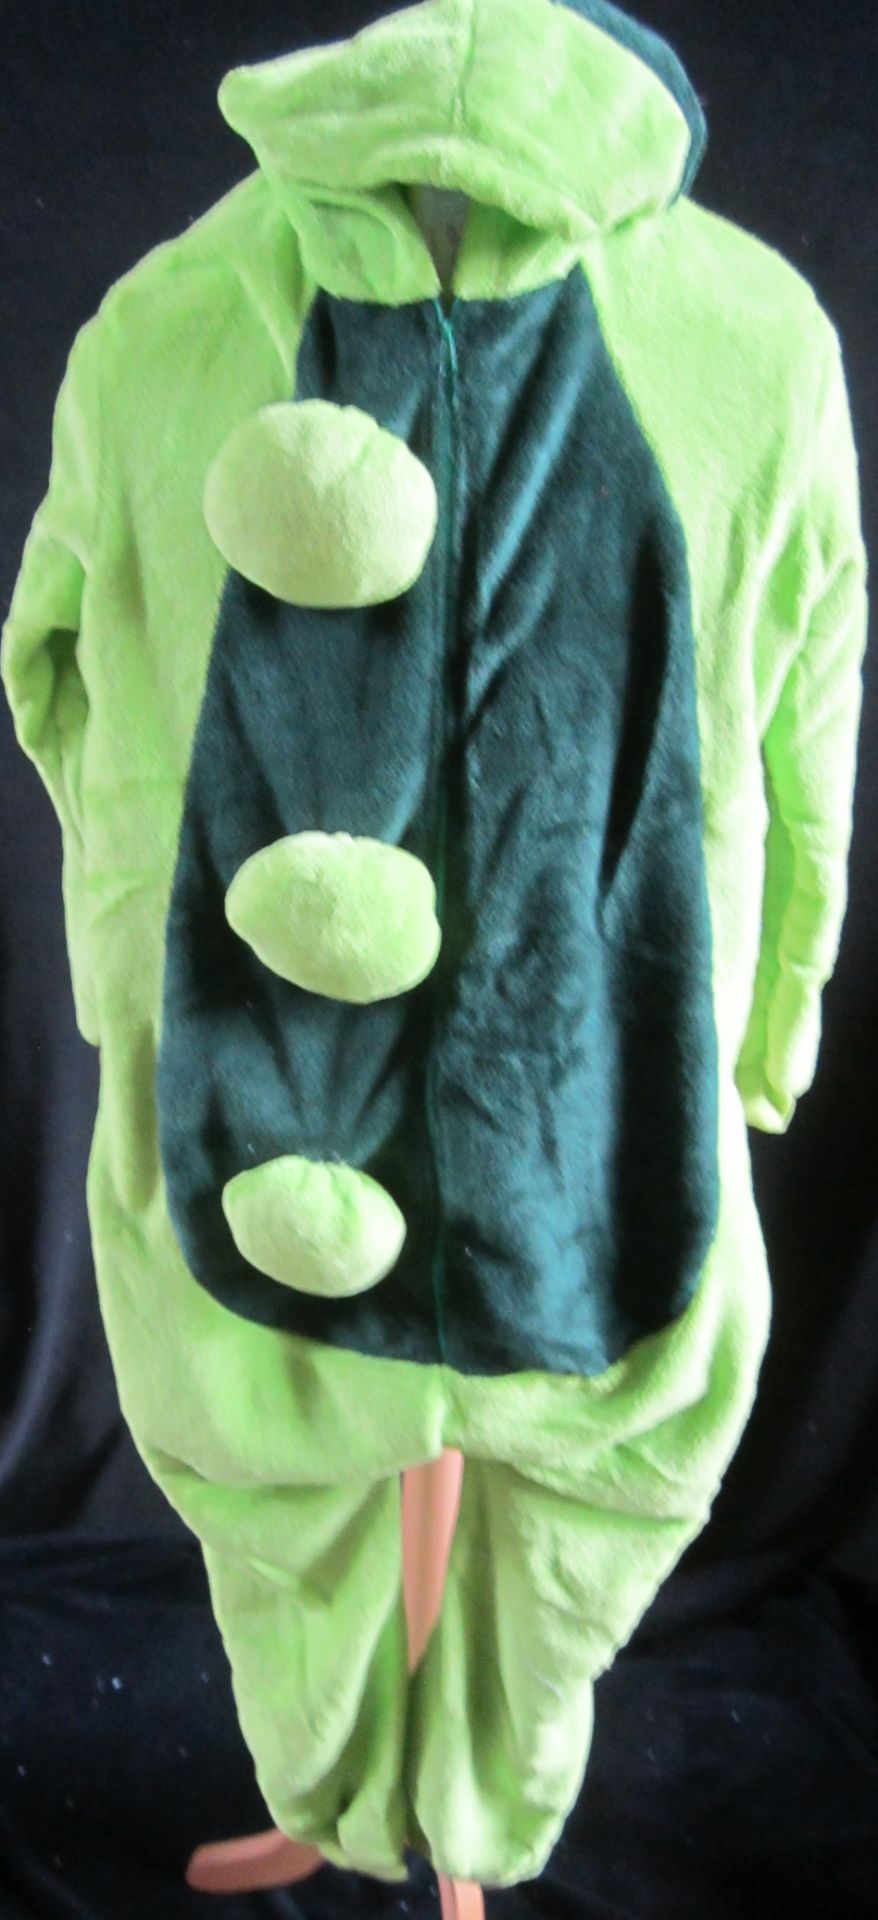 10 x Peas In a Pod Onesies, Green Small-Medium (Delivery Available)